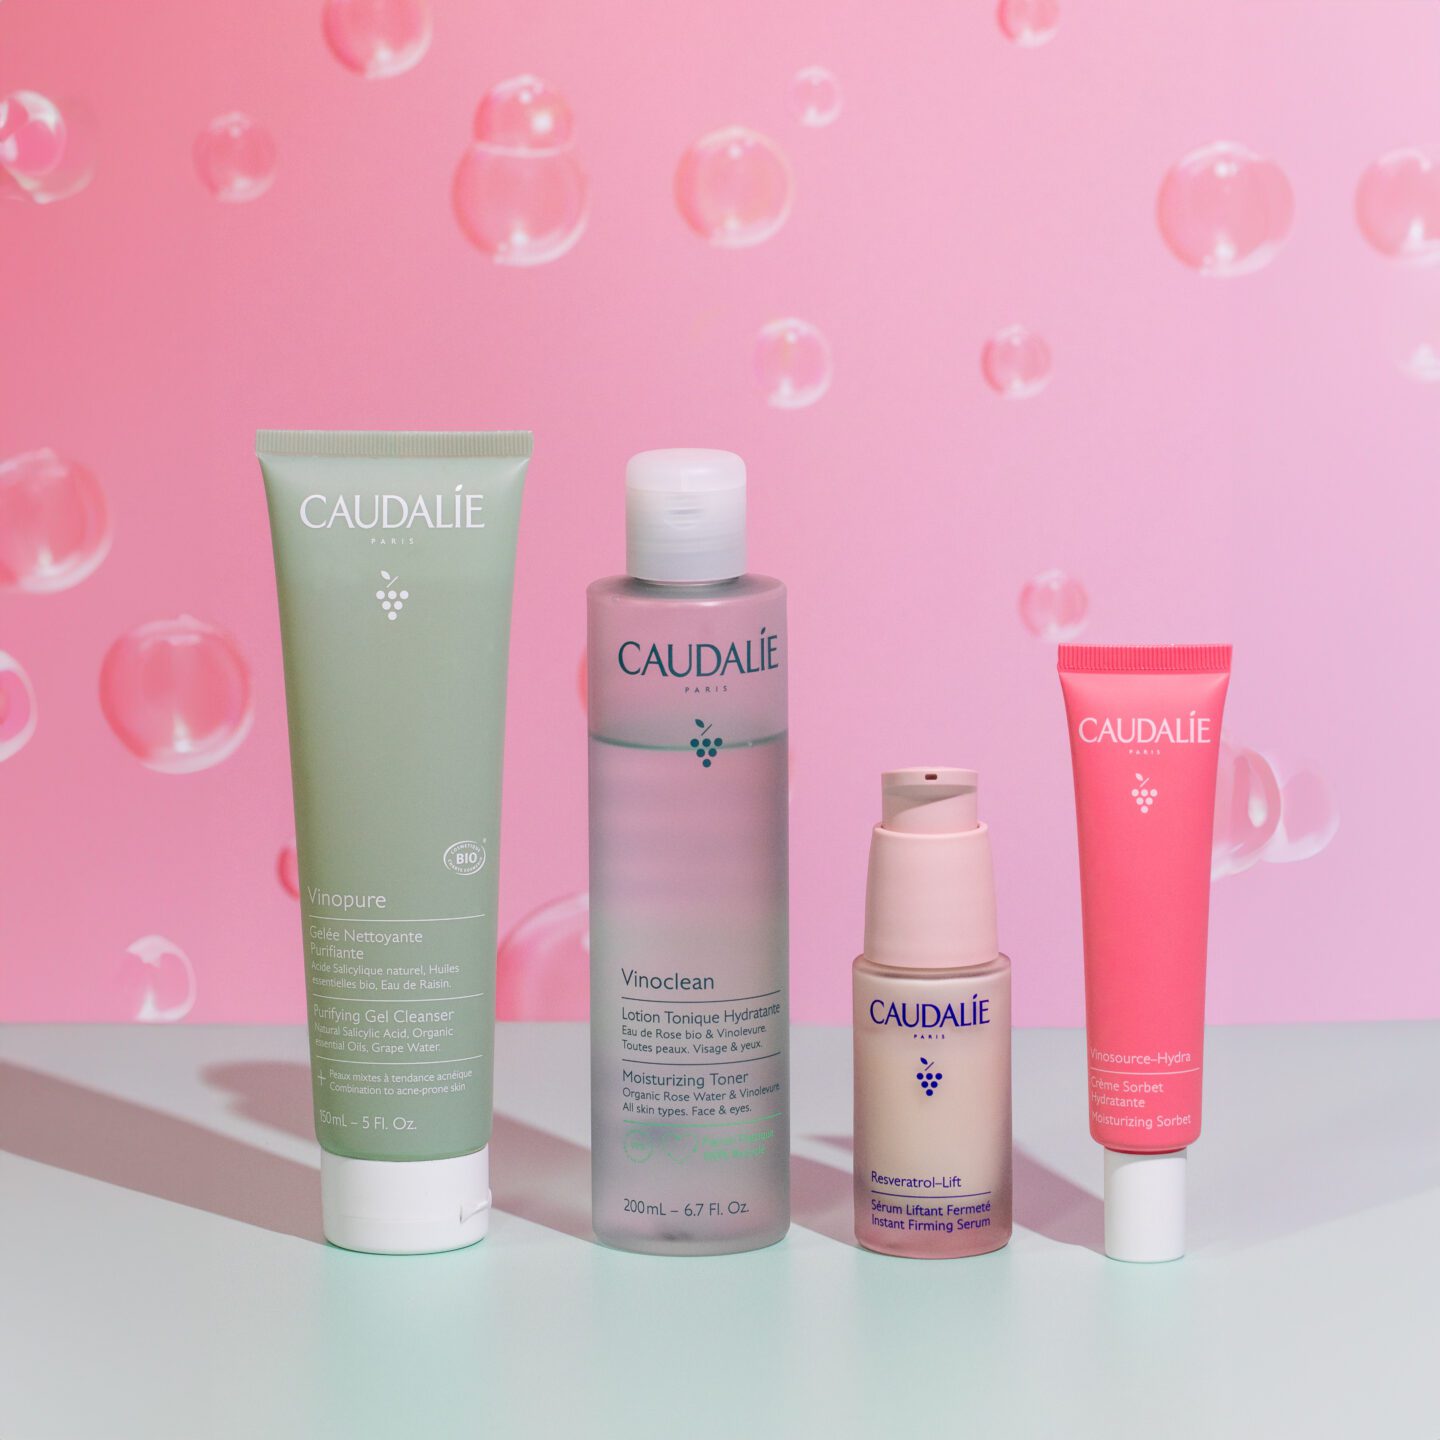 4 Must-try Caudalie favourites!